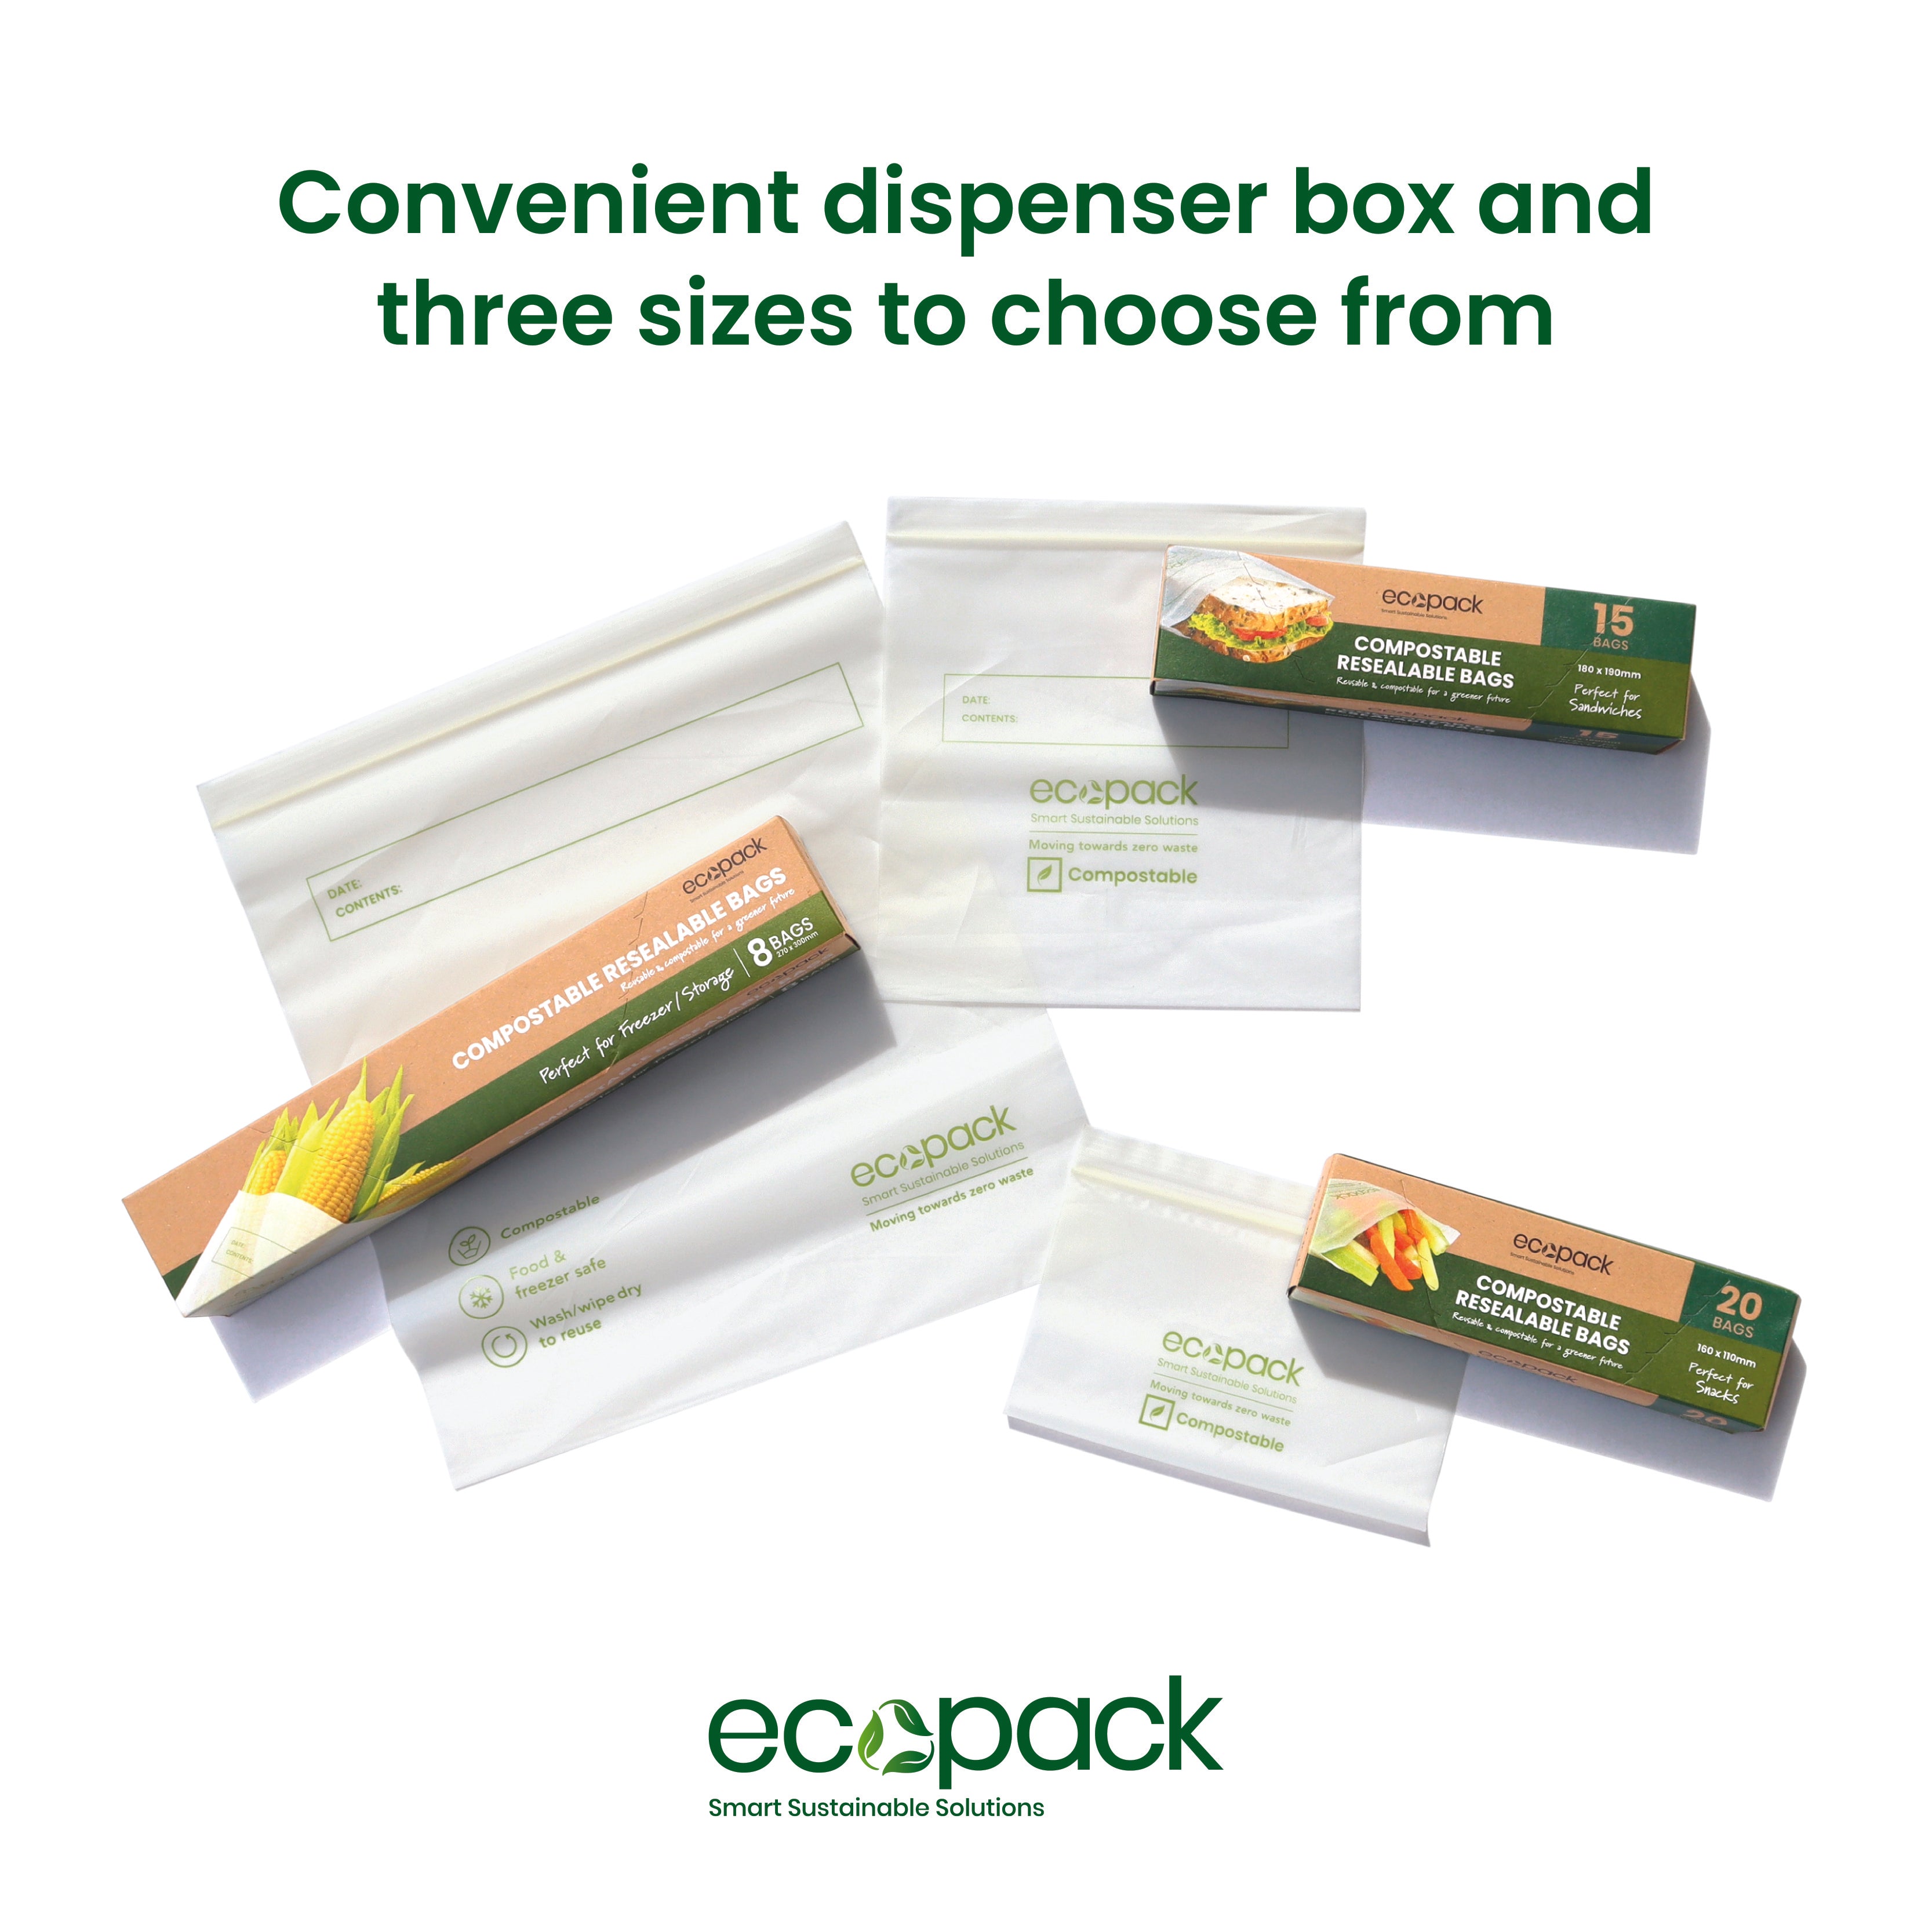 ED-2605 Compostable Resealable Storage/Freezer Bags